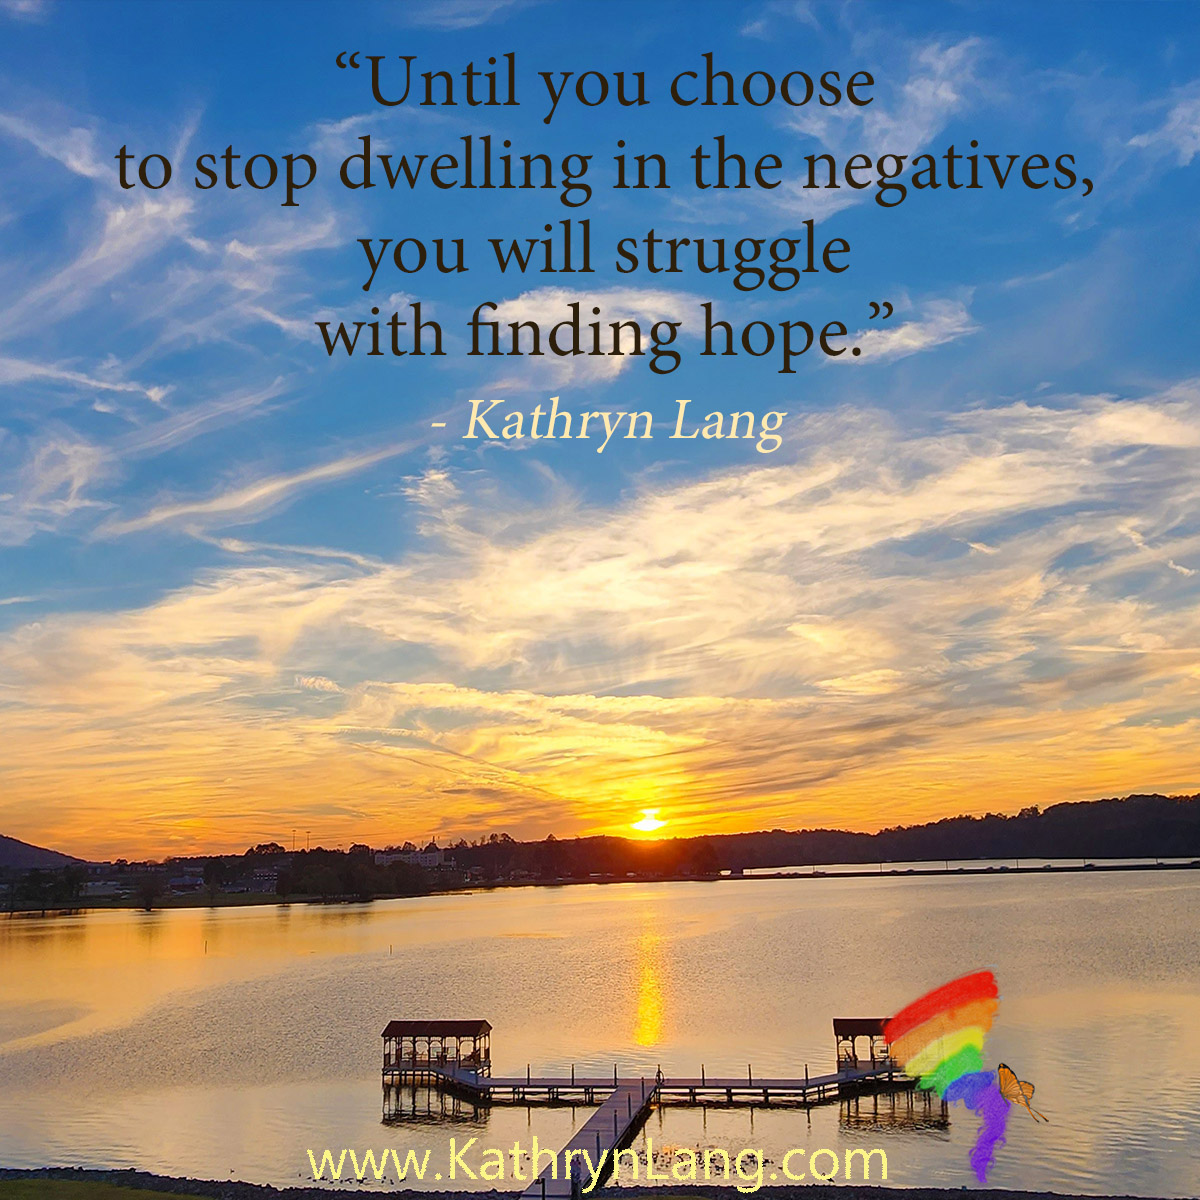 #QuoteoftheDay

Until you choose 
to stop dwelling in the negatives, 
you will struggle 
with finding hope.
- Kathryn Lang